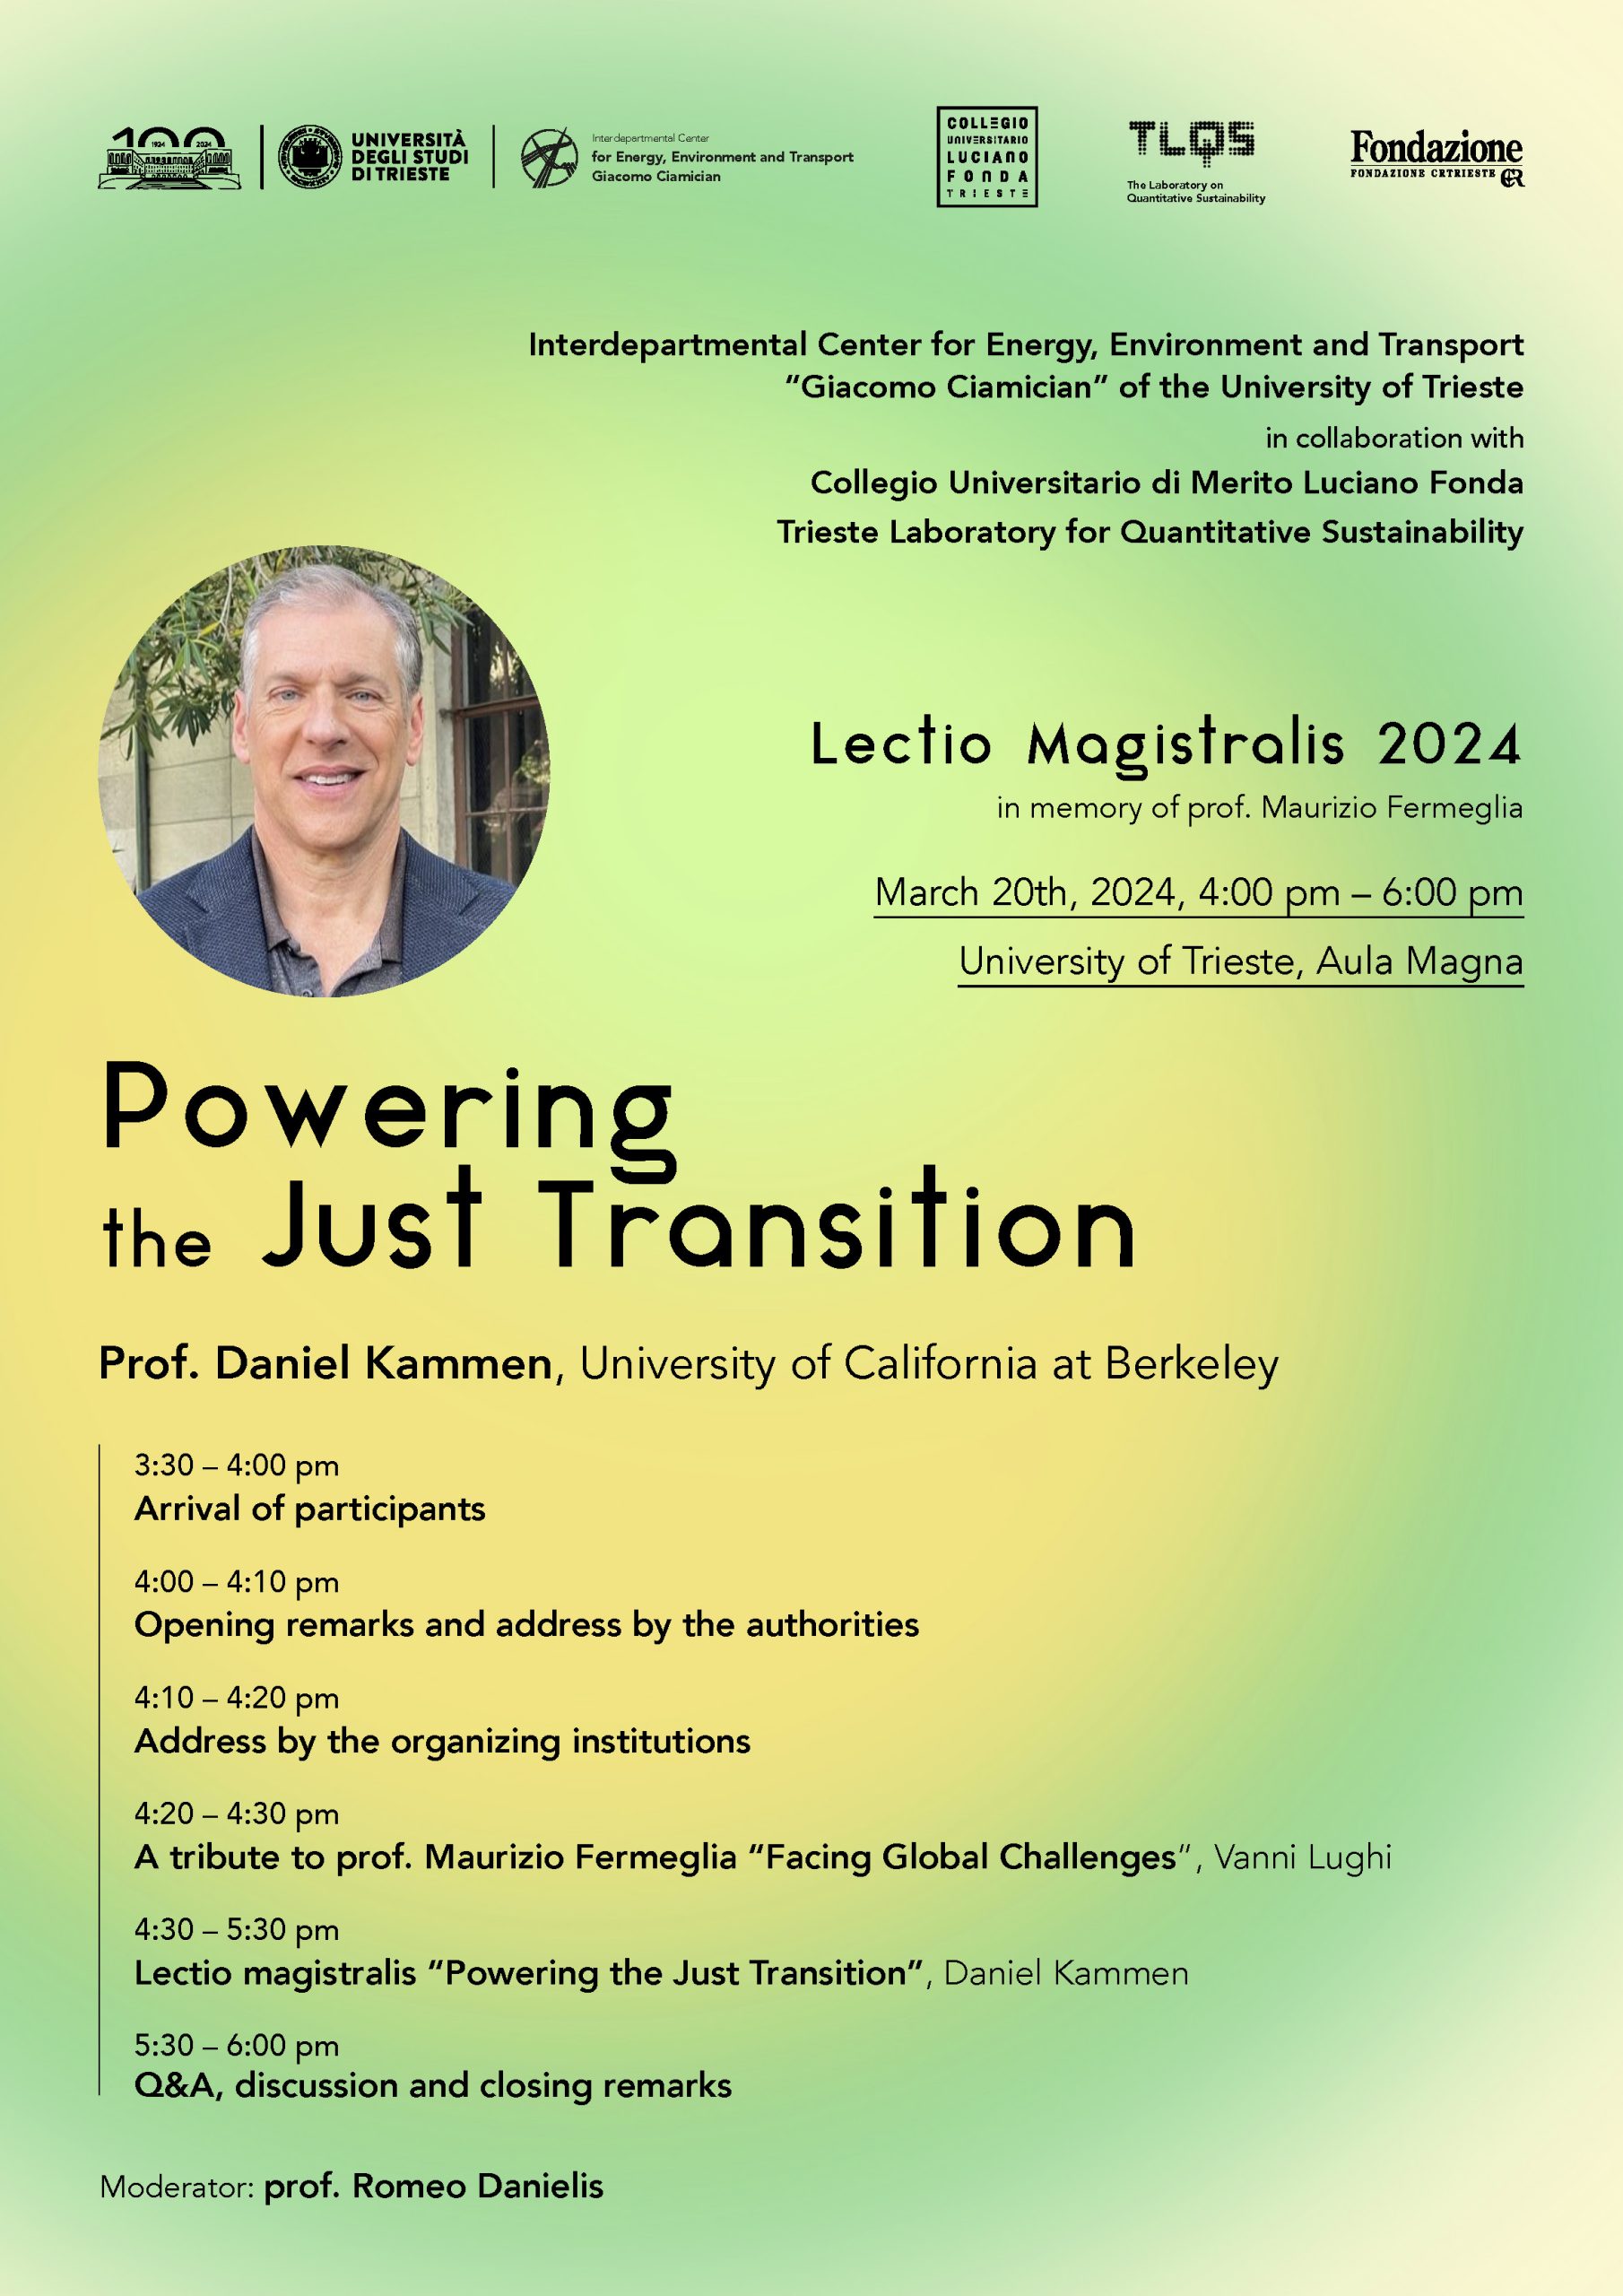 POWERING THE JUST TRANSITION • Lectio Magistralis by Daniel Kammen – Wednesday, 20th March 2024